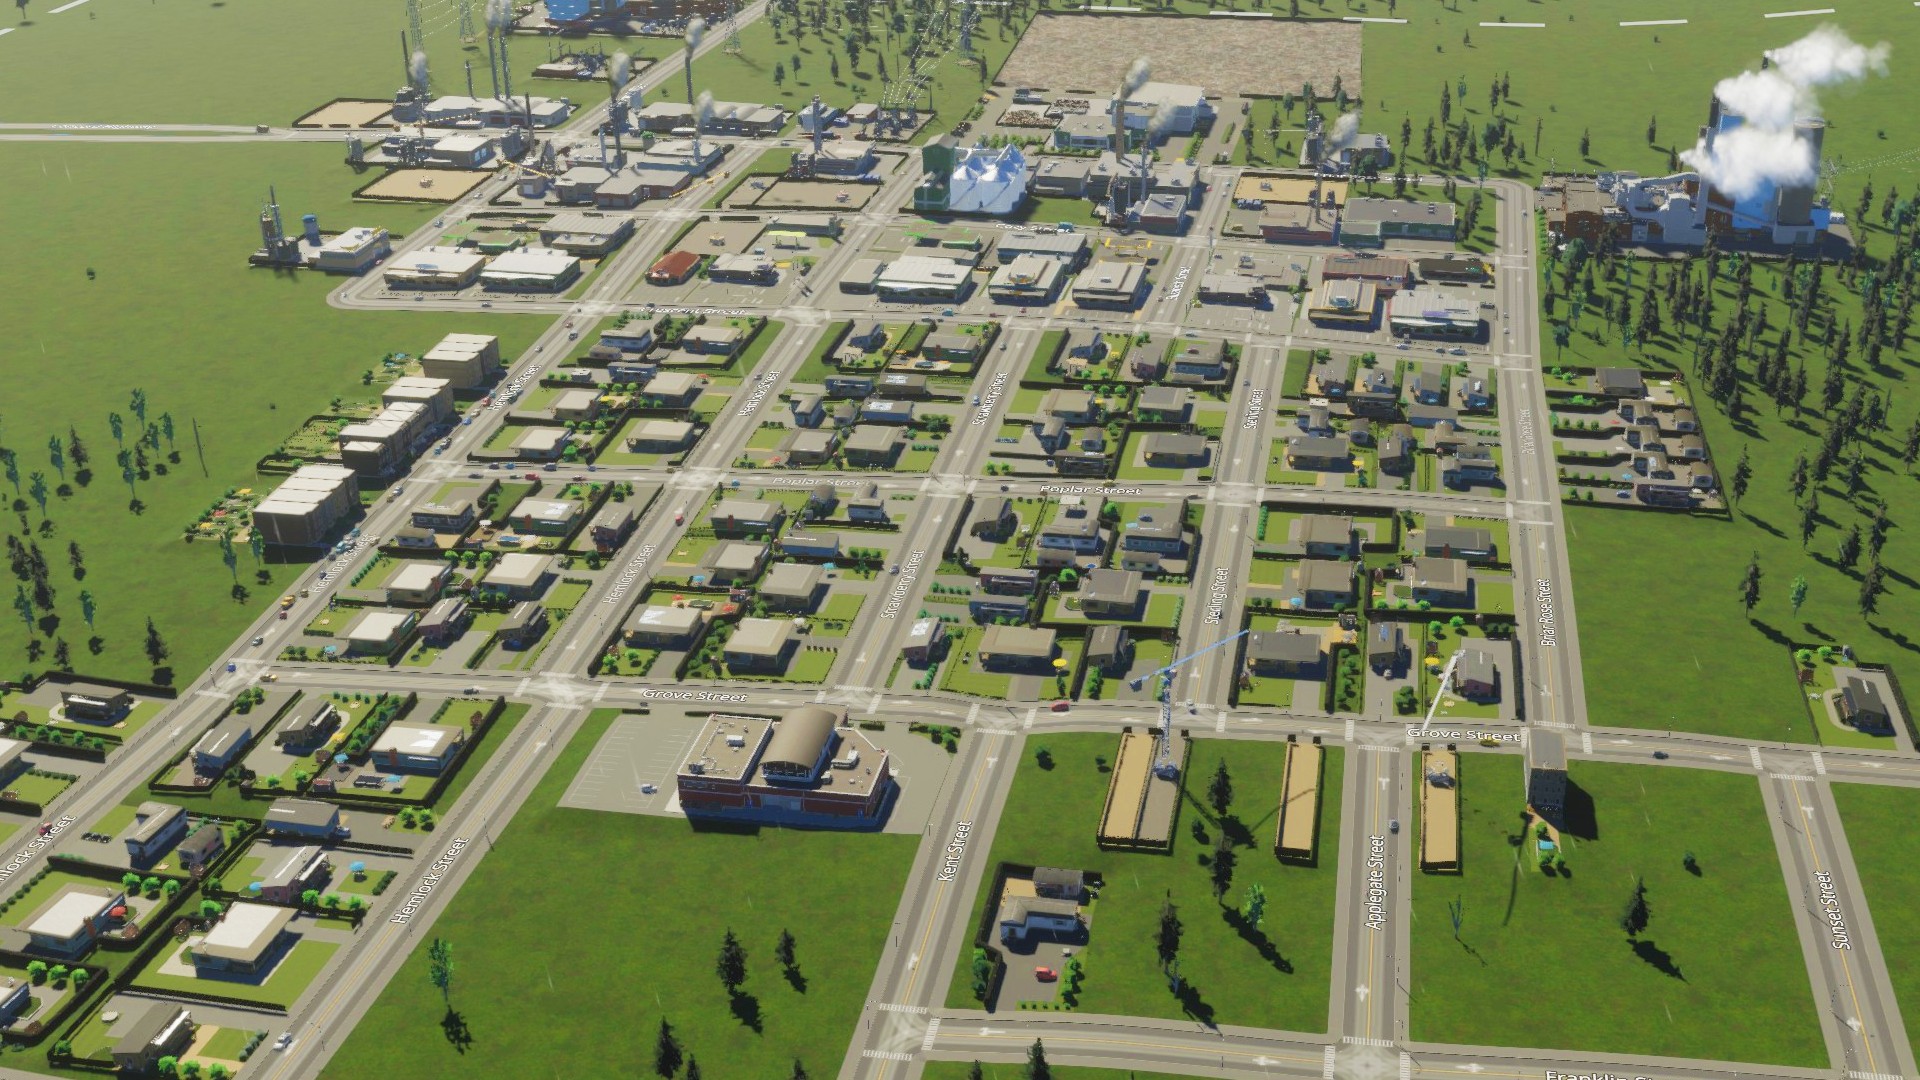 Cities: Skylines 2 Features: A Comprehensive Summary!